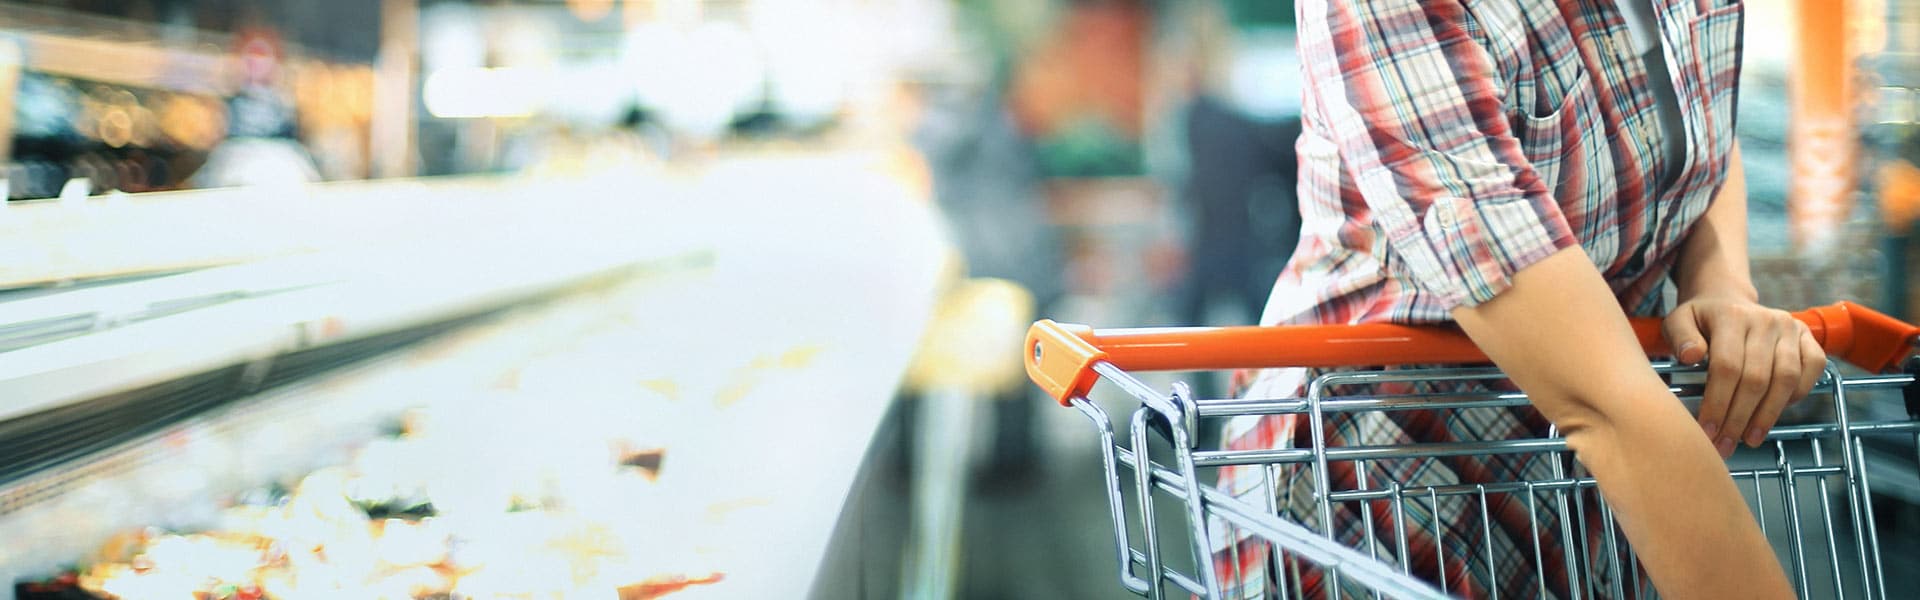 SAP Co-Innovates Replenishment Planning Solution with Retailers